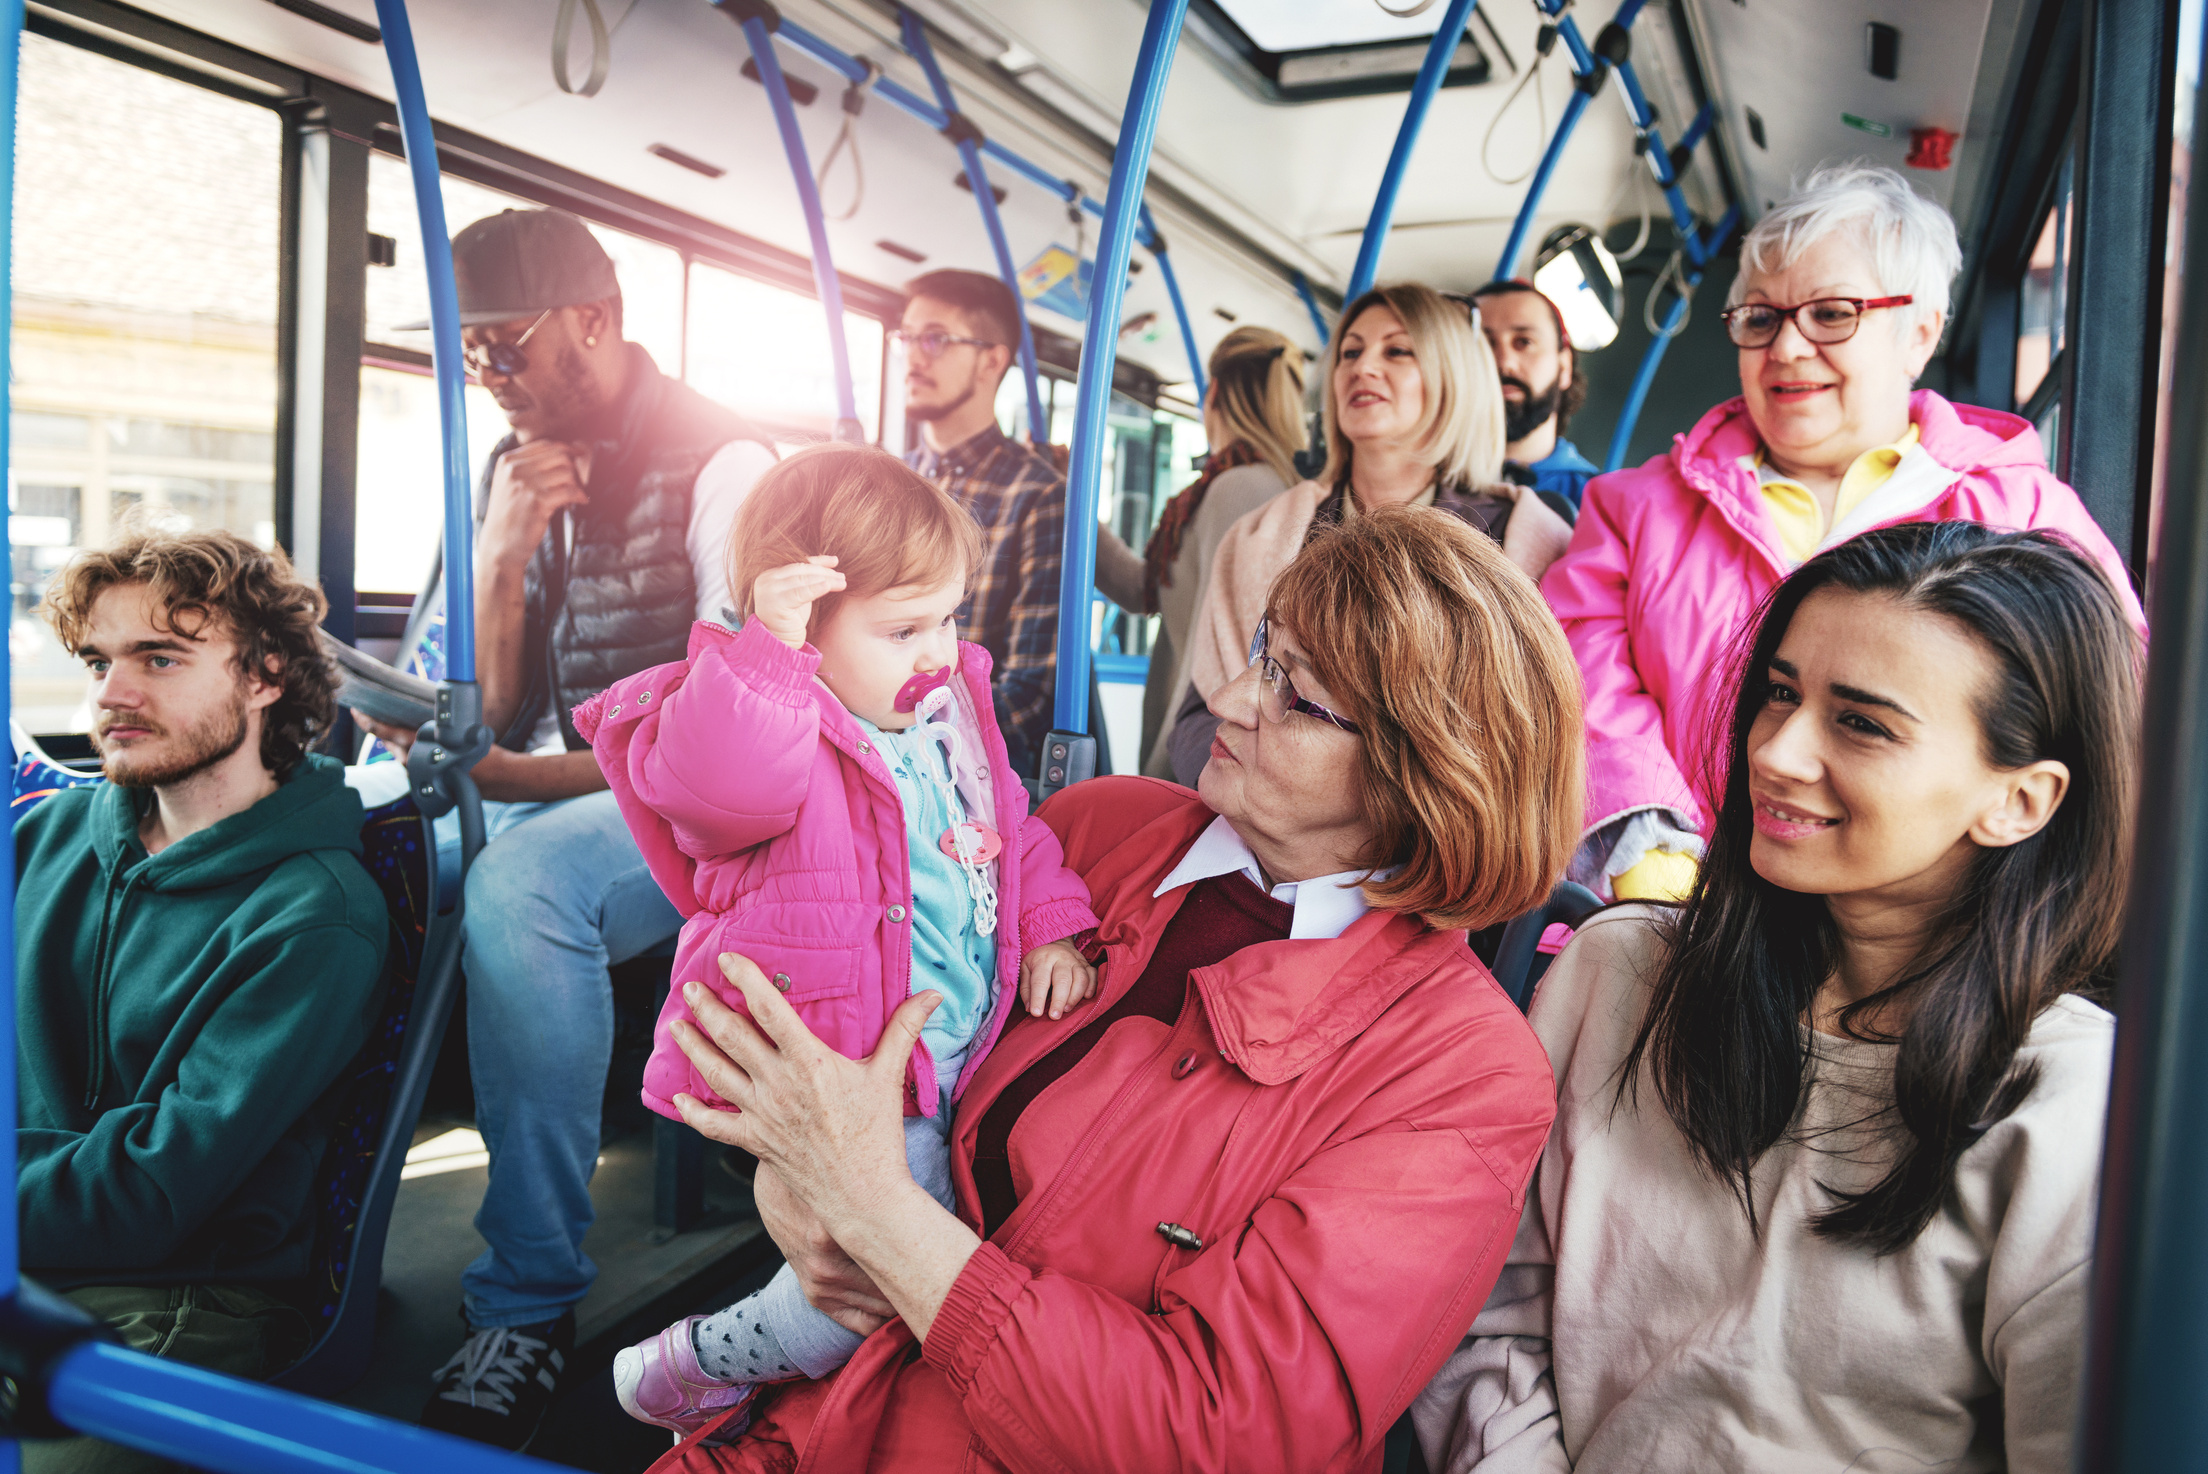 People of all ages in public bus